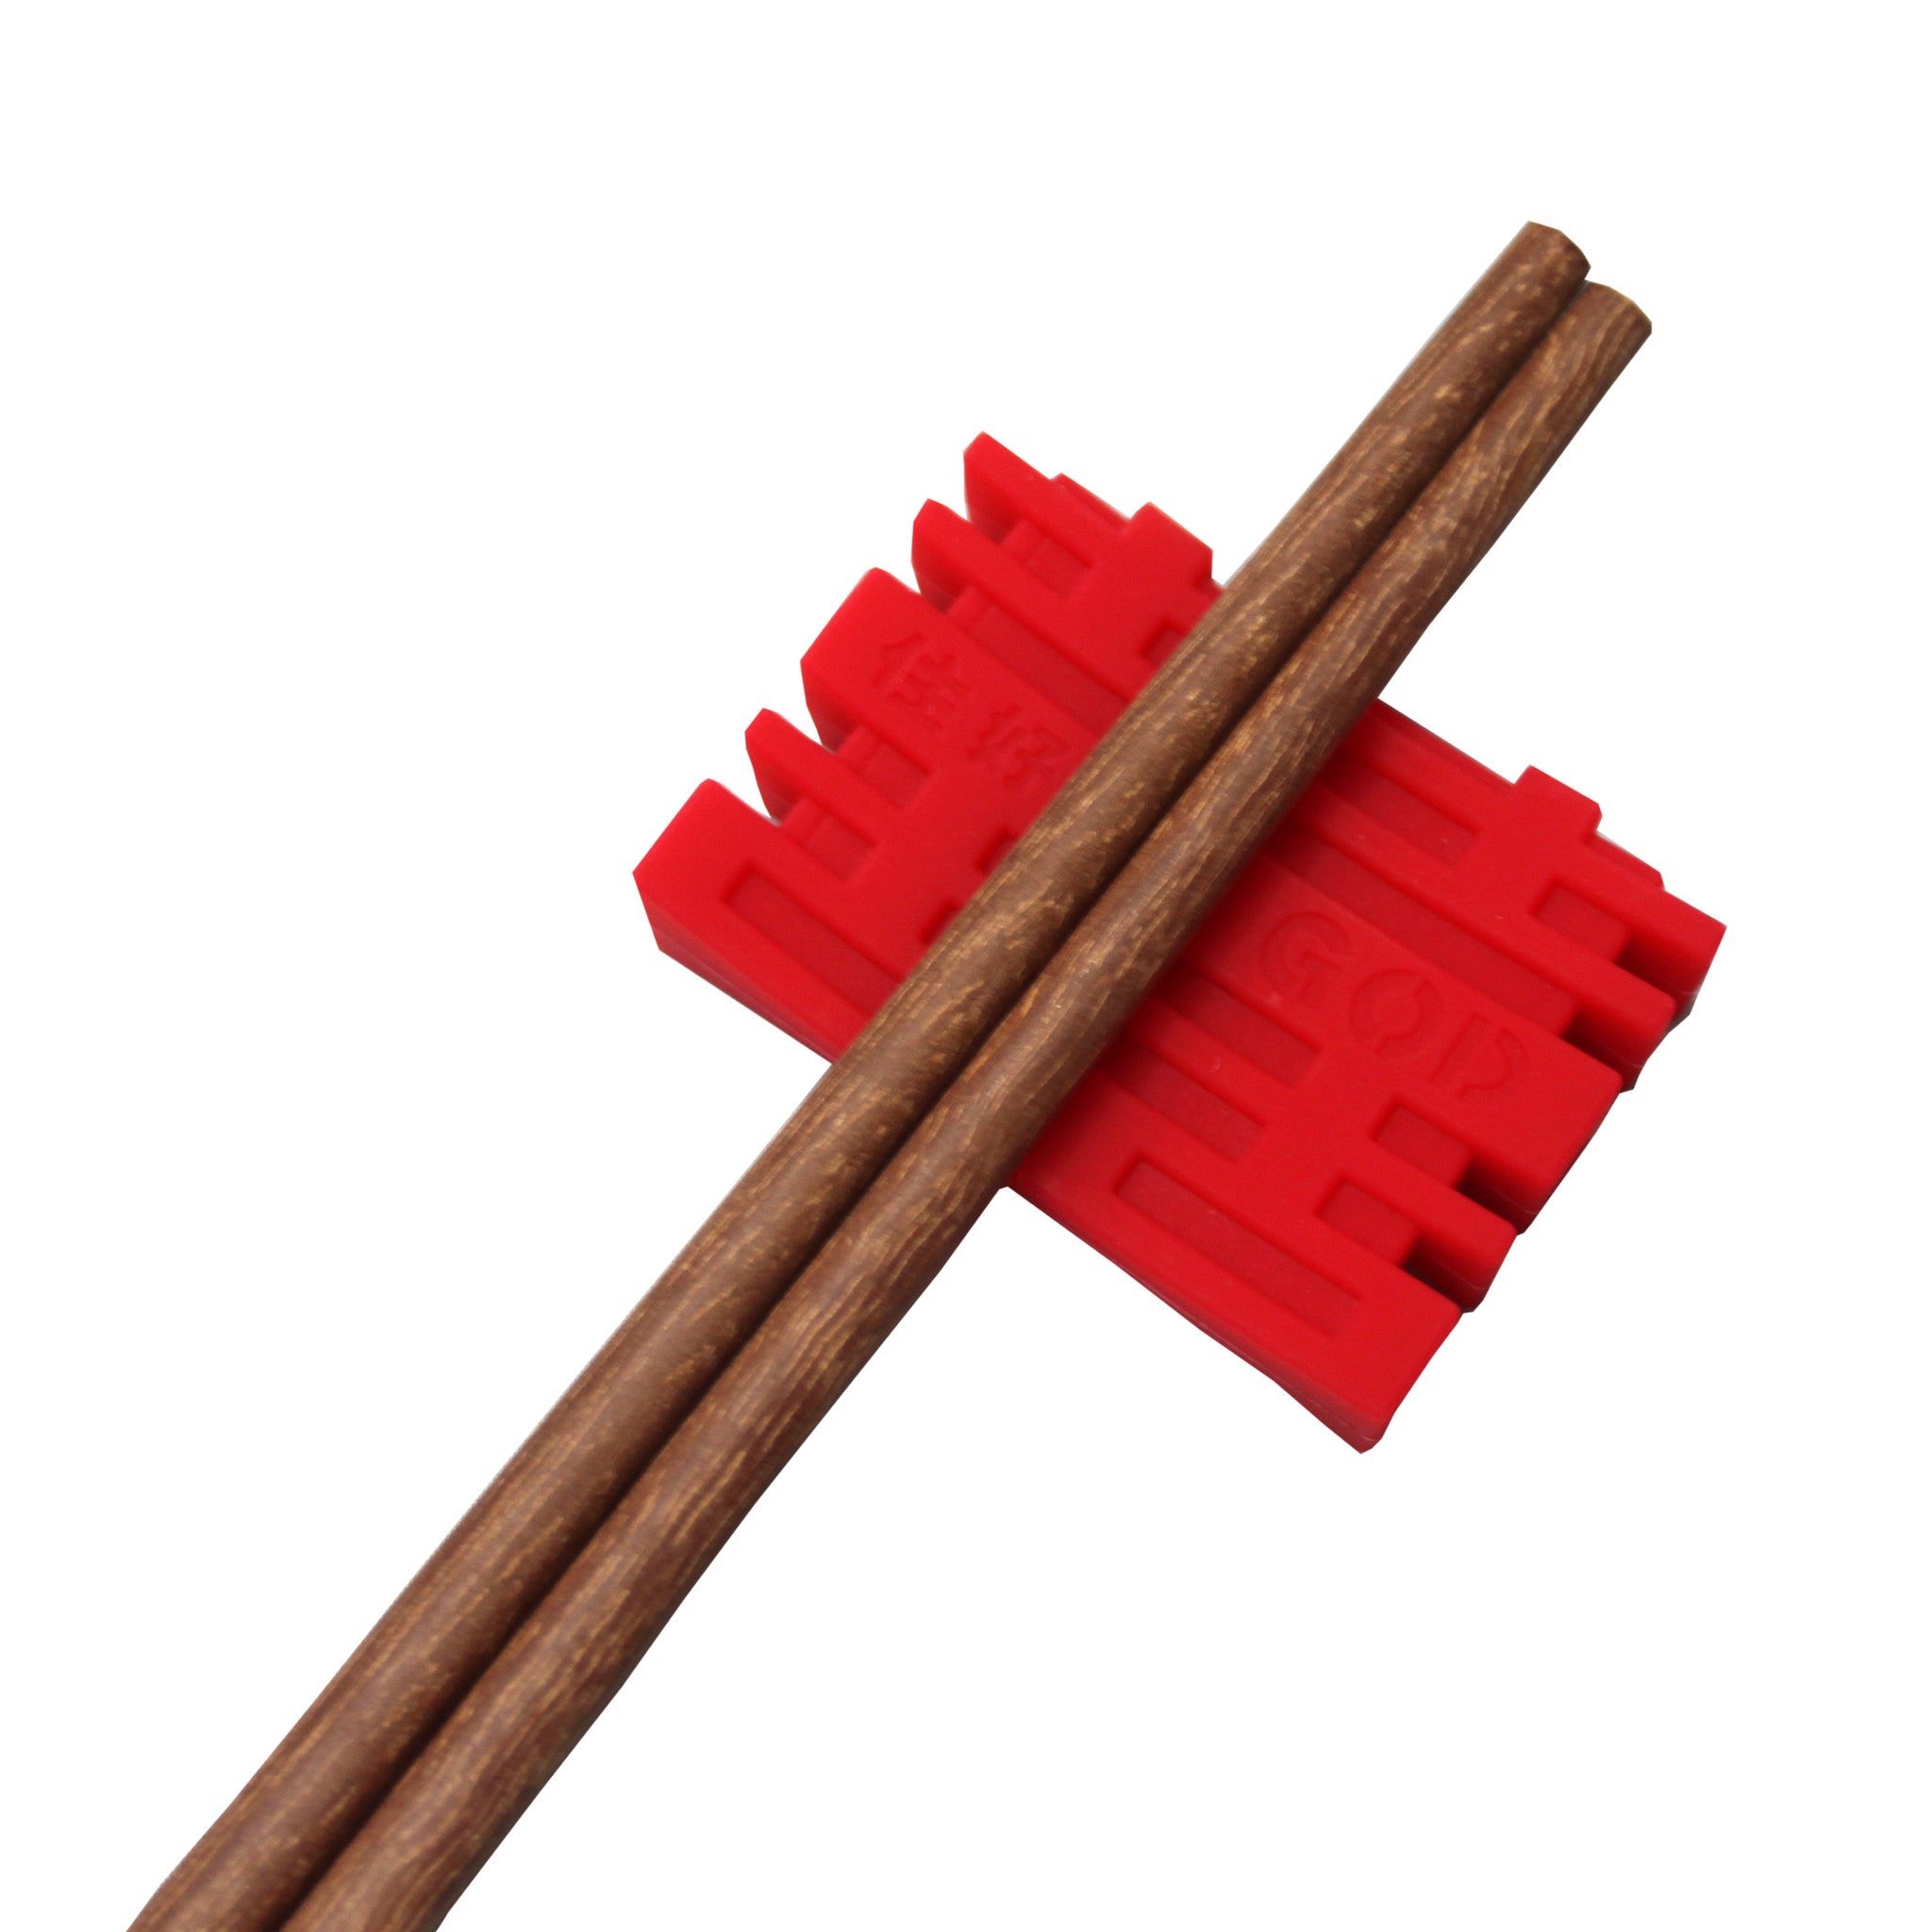 'Chinese Key' patterned chopsticks in Wenge Wood, Tabletop and Entertaining, Goods of Desire, Goods of Desire